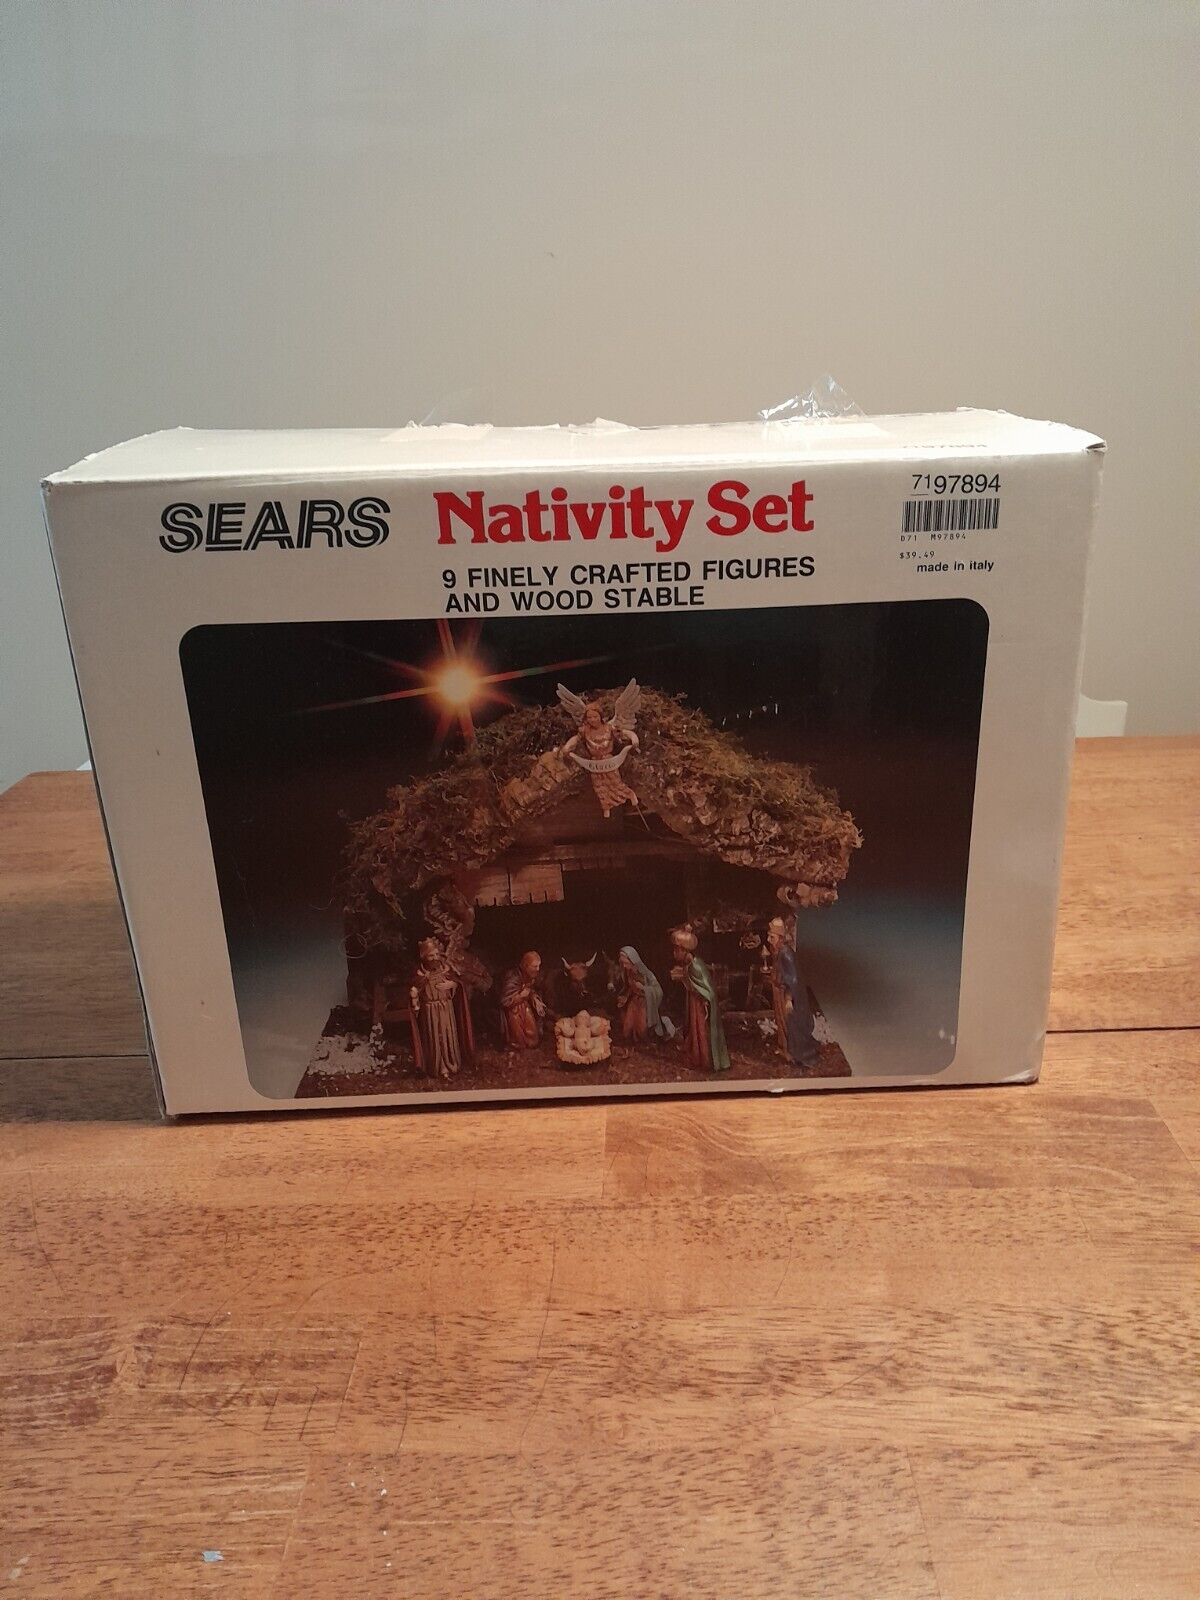 Vintage Sears Nativity Set 9 Figures Wood Stable Made In Italy 97894 w/ box